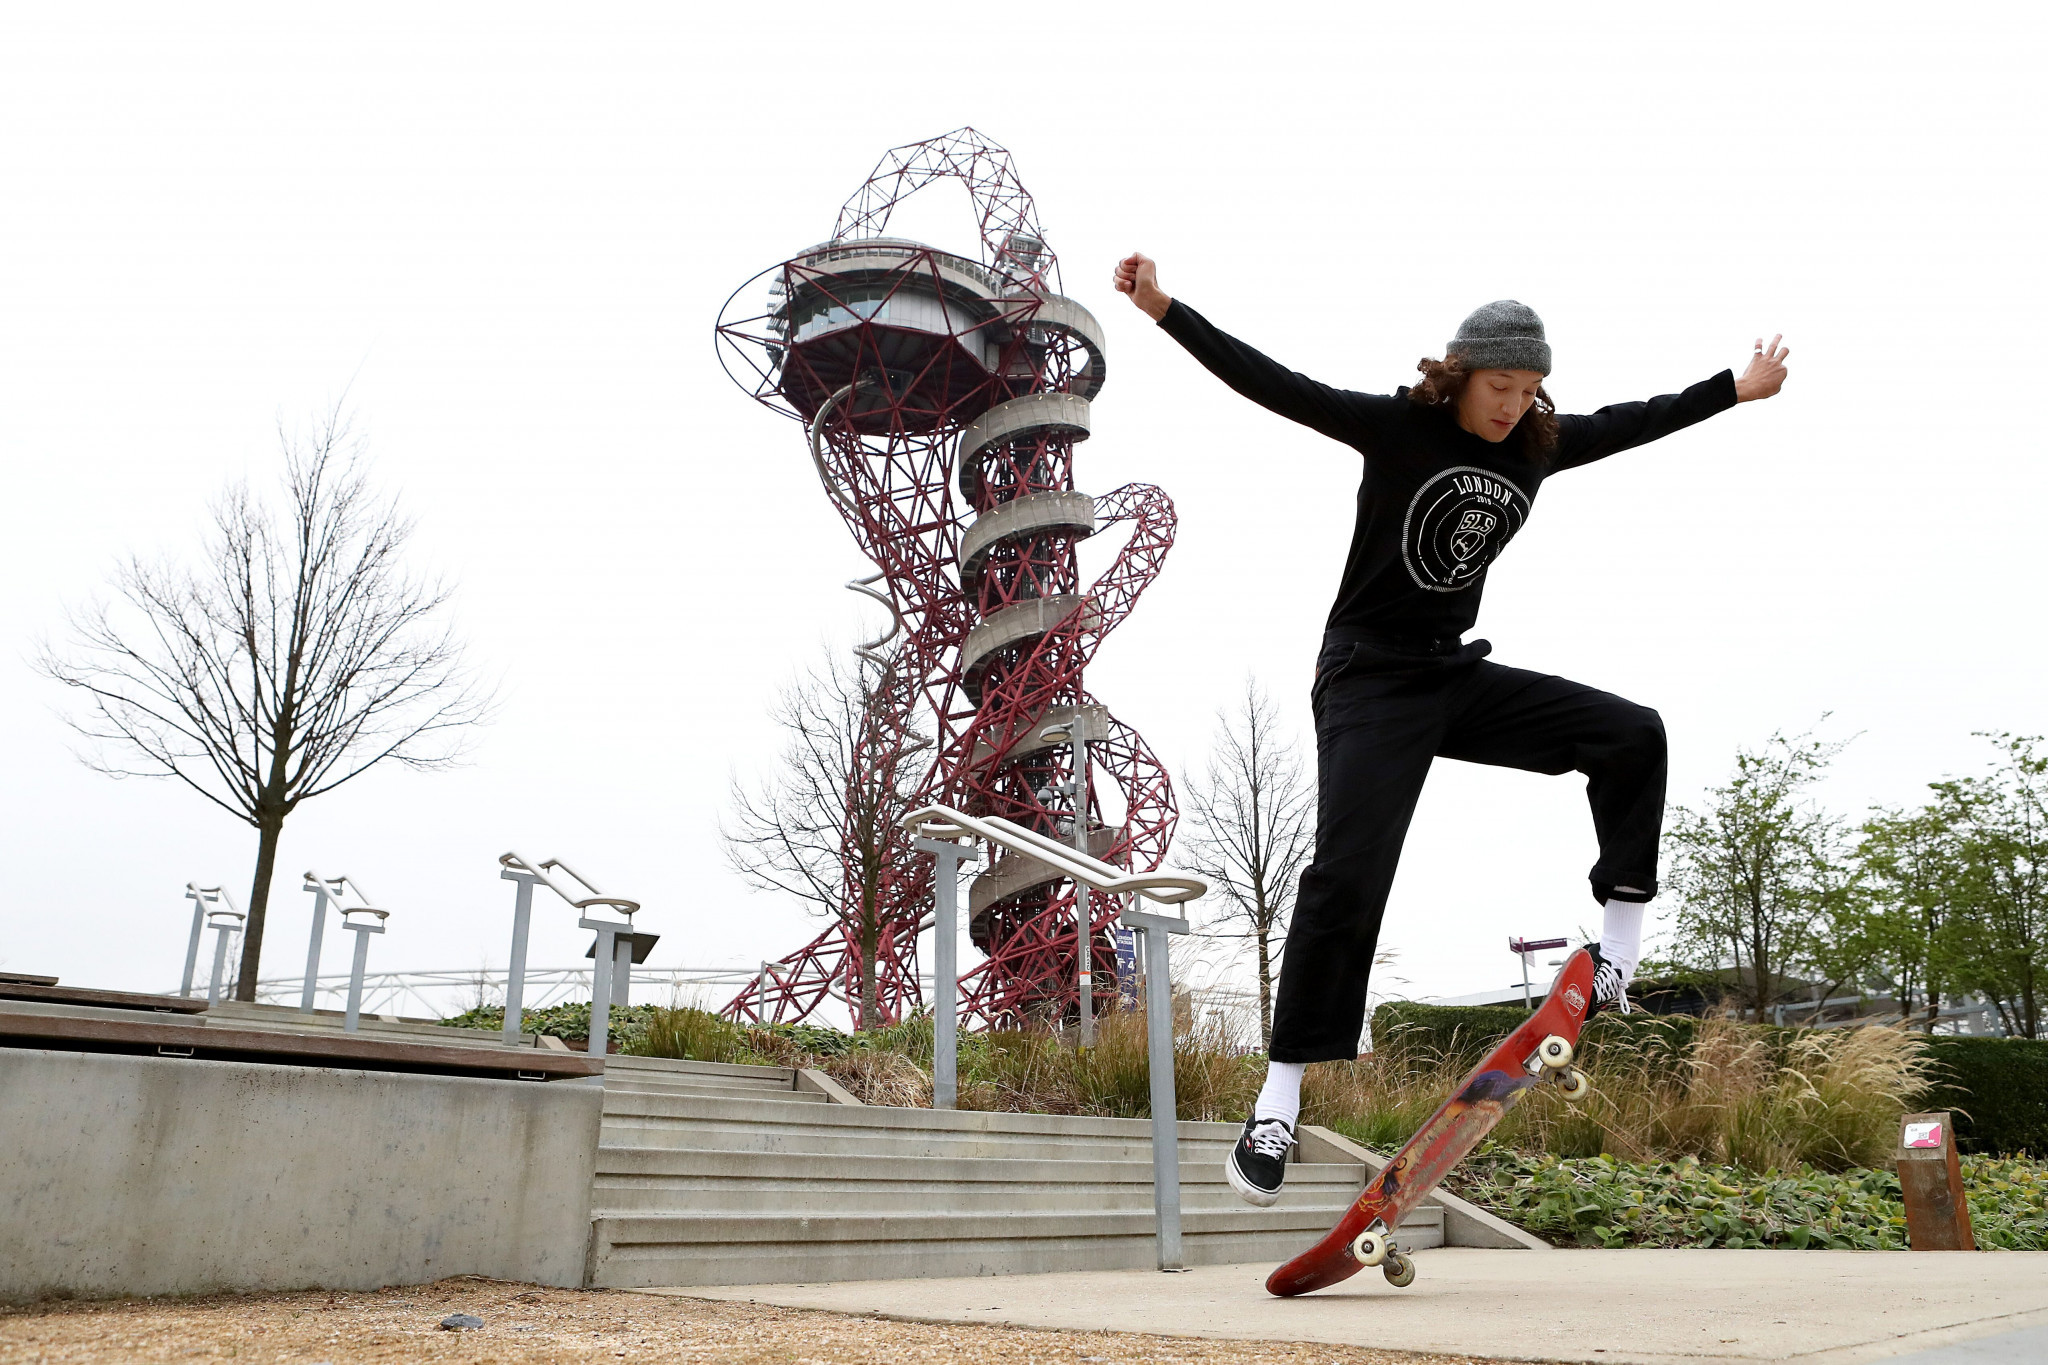 British skateboarder Helena Long showed off her skills at the launch of the event ©London 2019